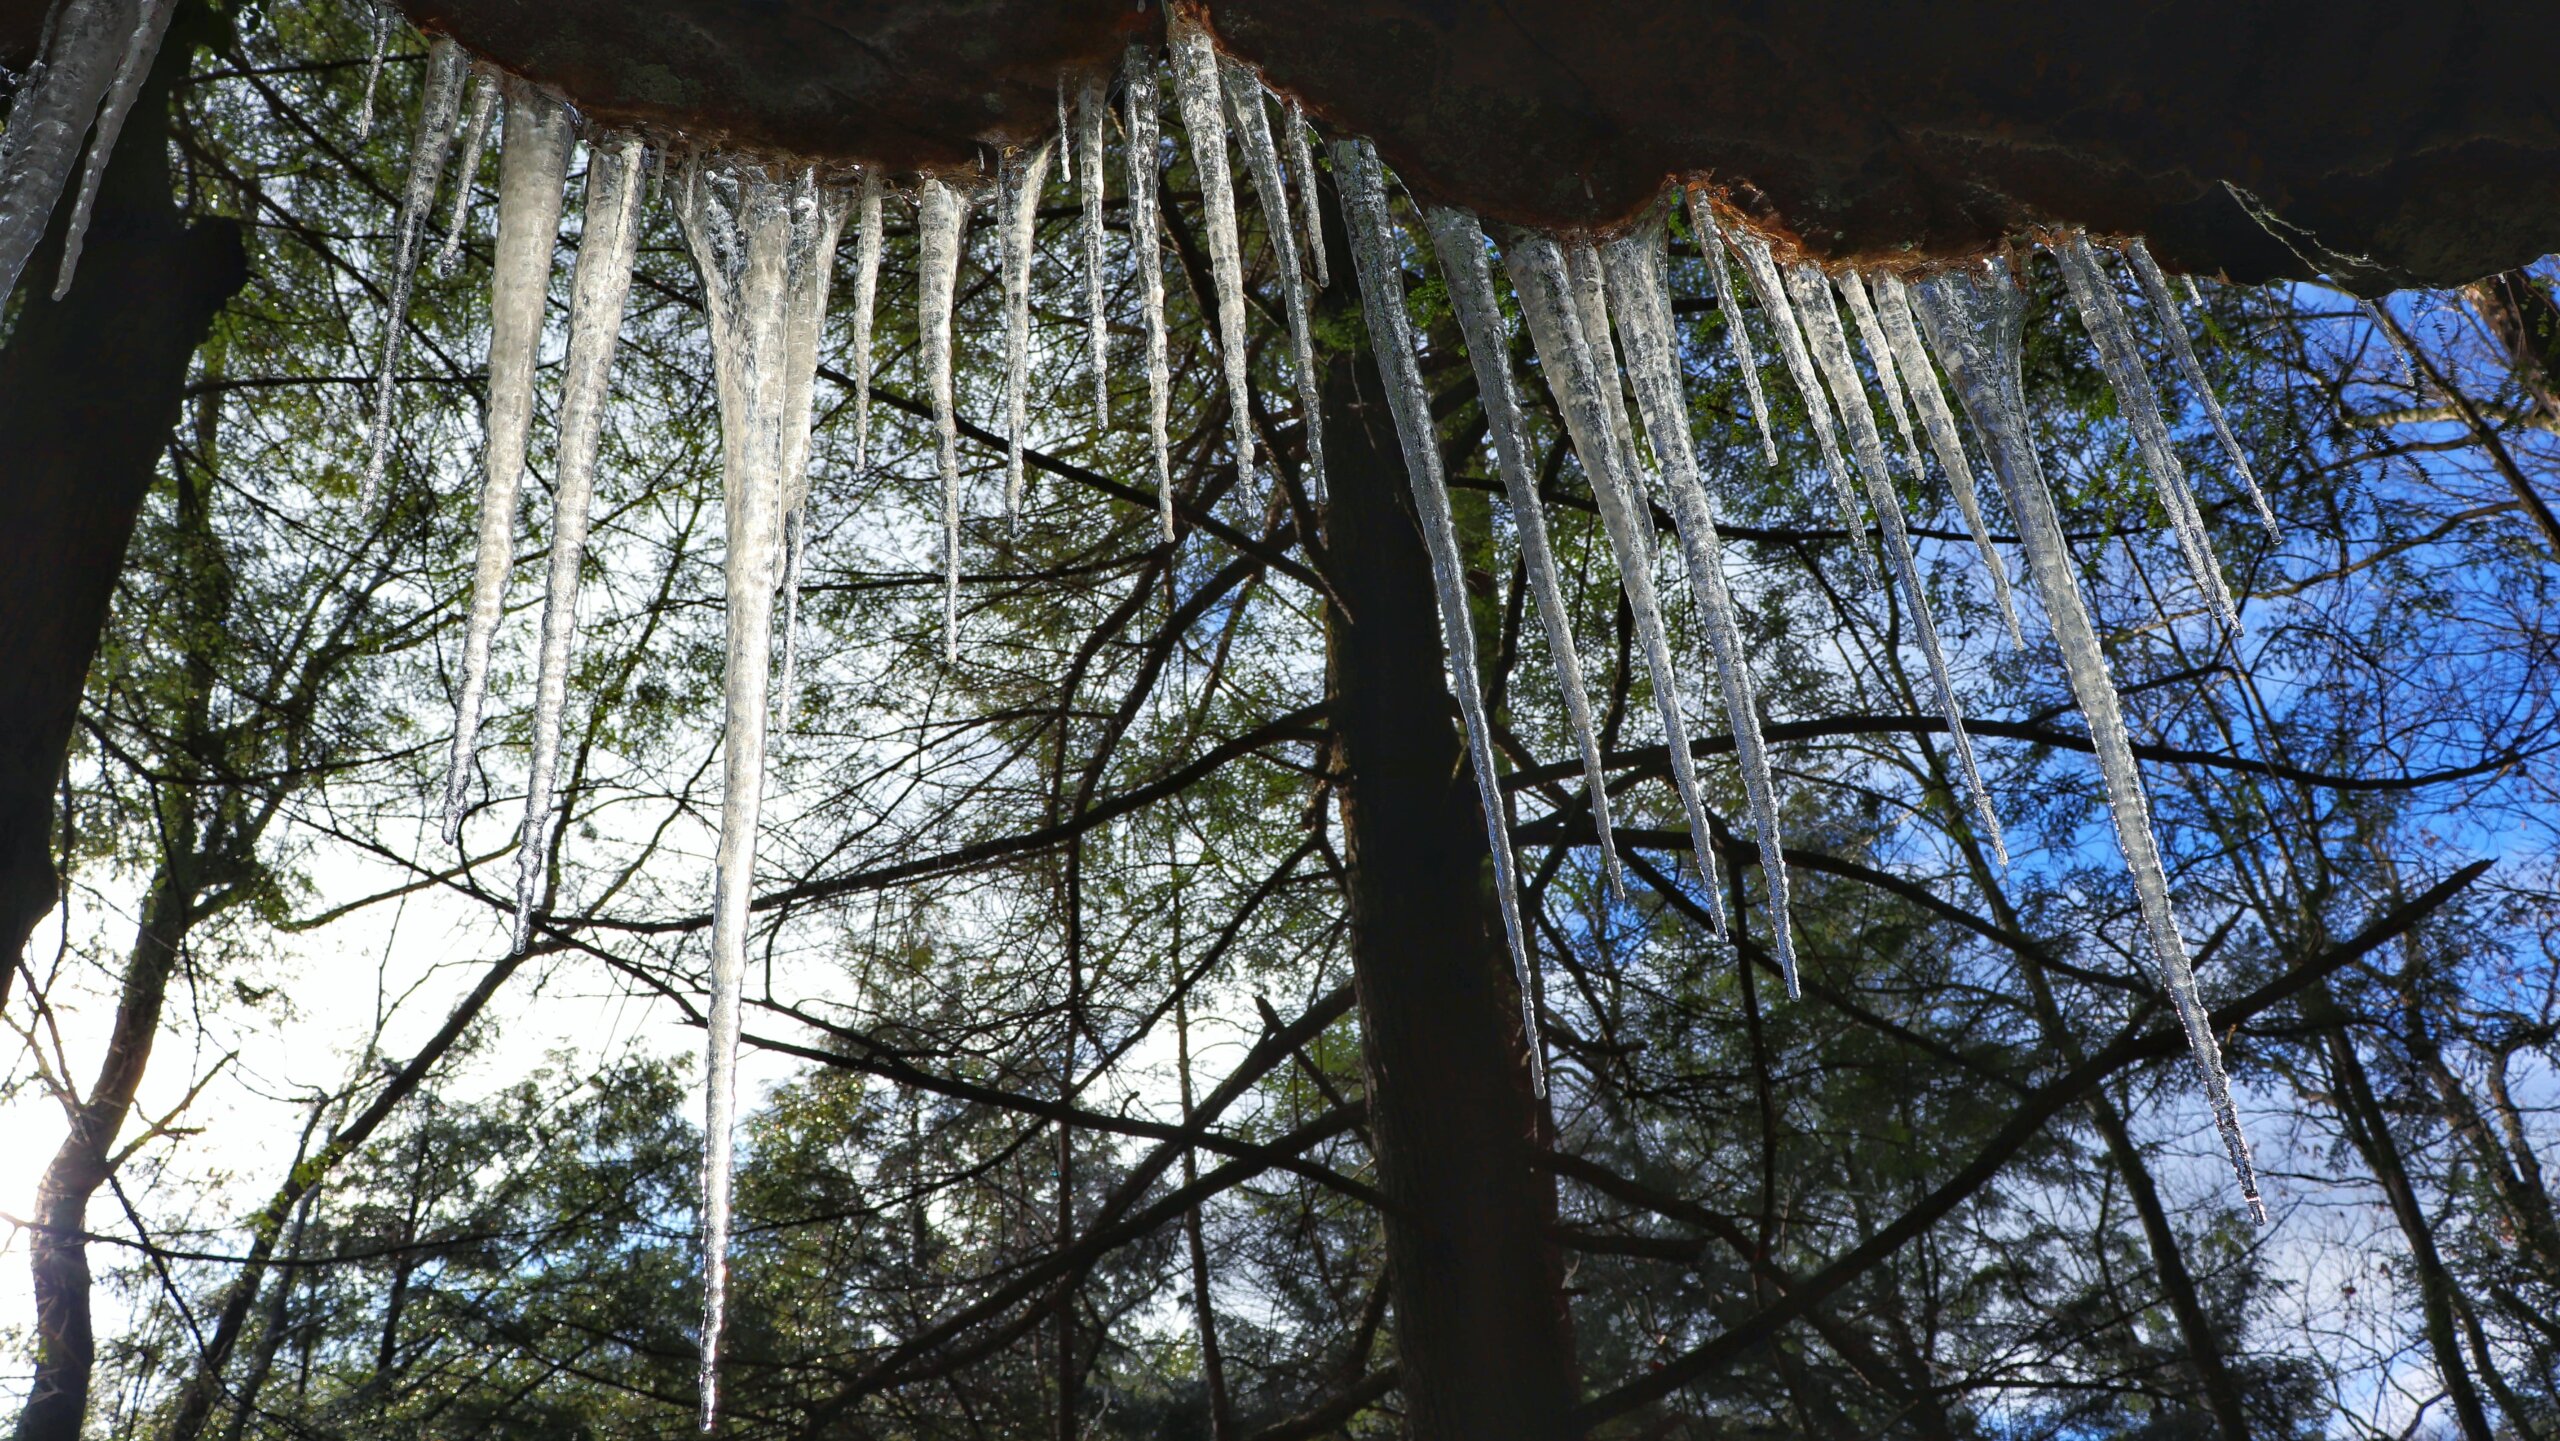 Find Winter Adventure Hiking at Greeter Falls